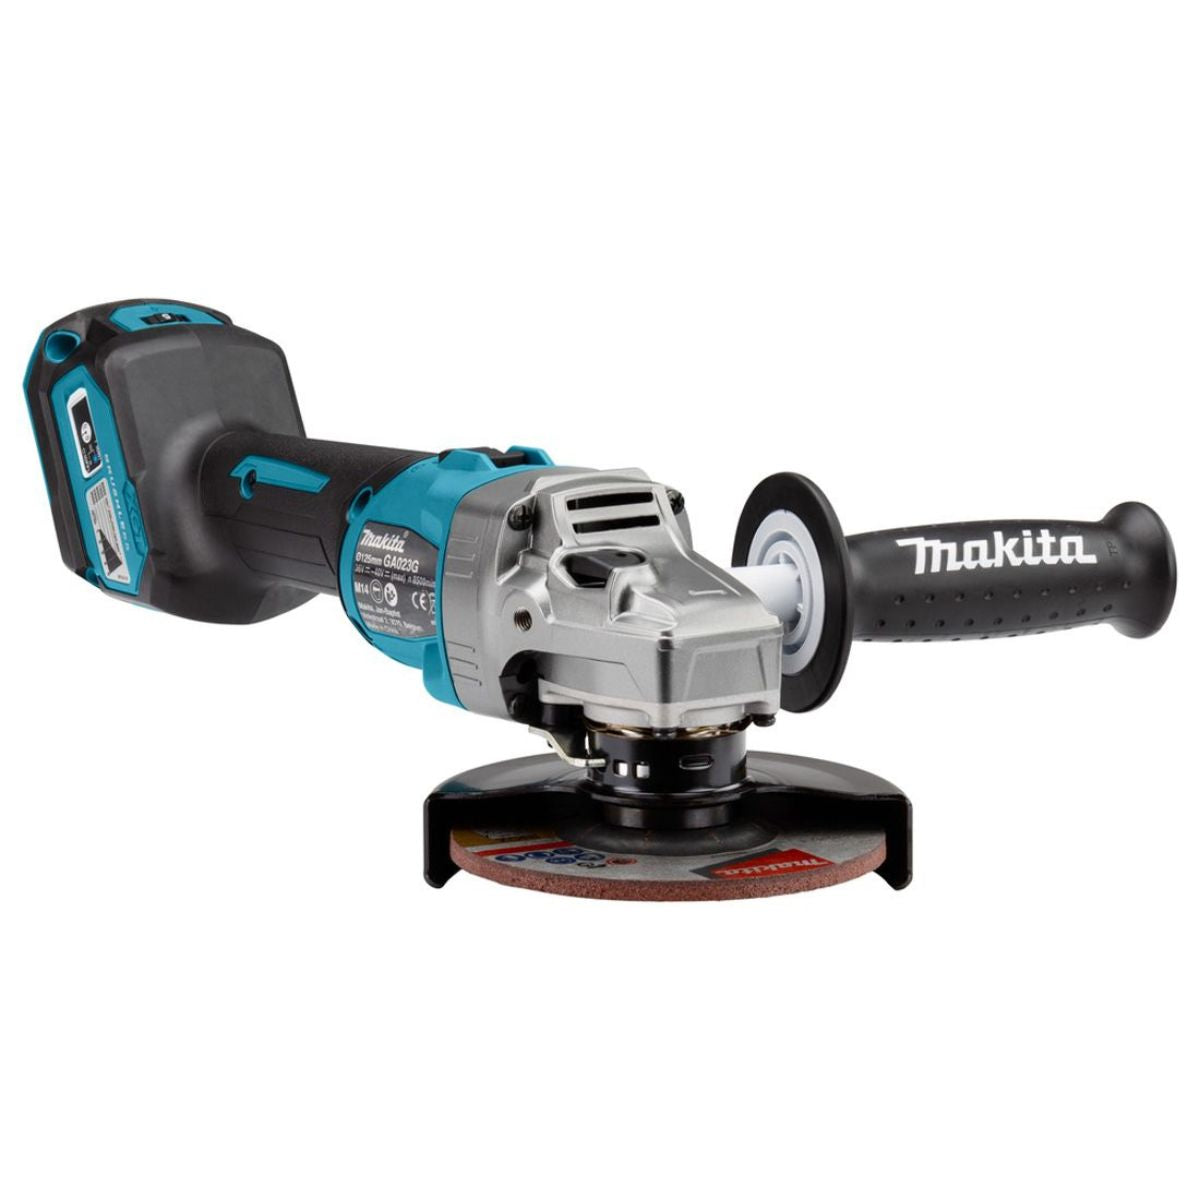 Makita GA023GZ01 40v XGT Max 125mm Brushless Angle Grinder Body Only With Carry Case